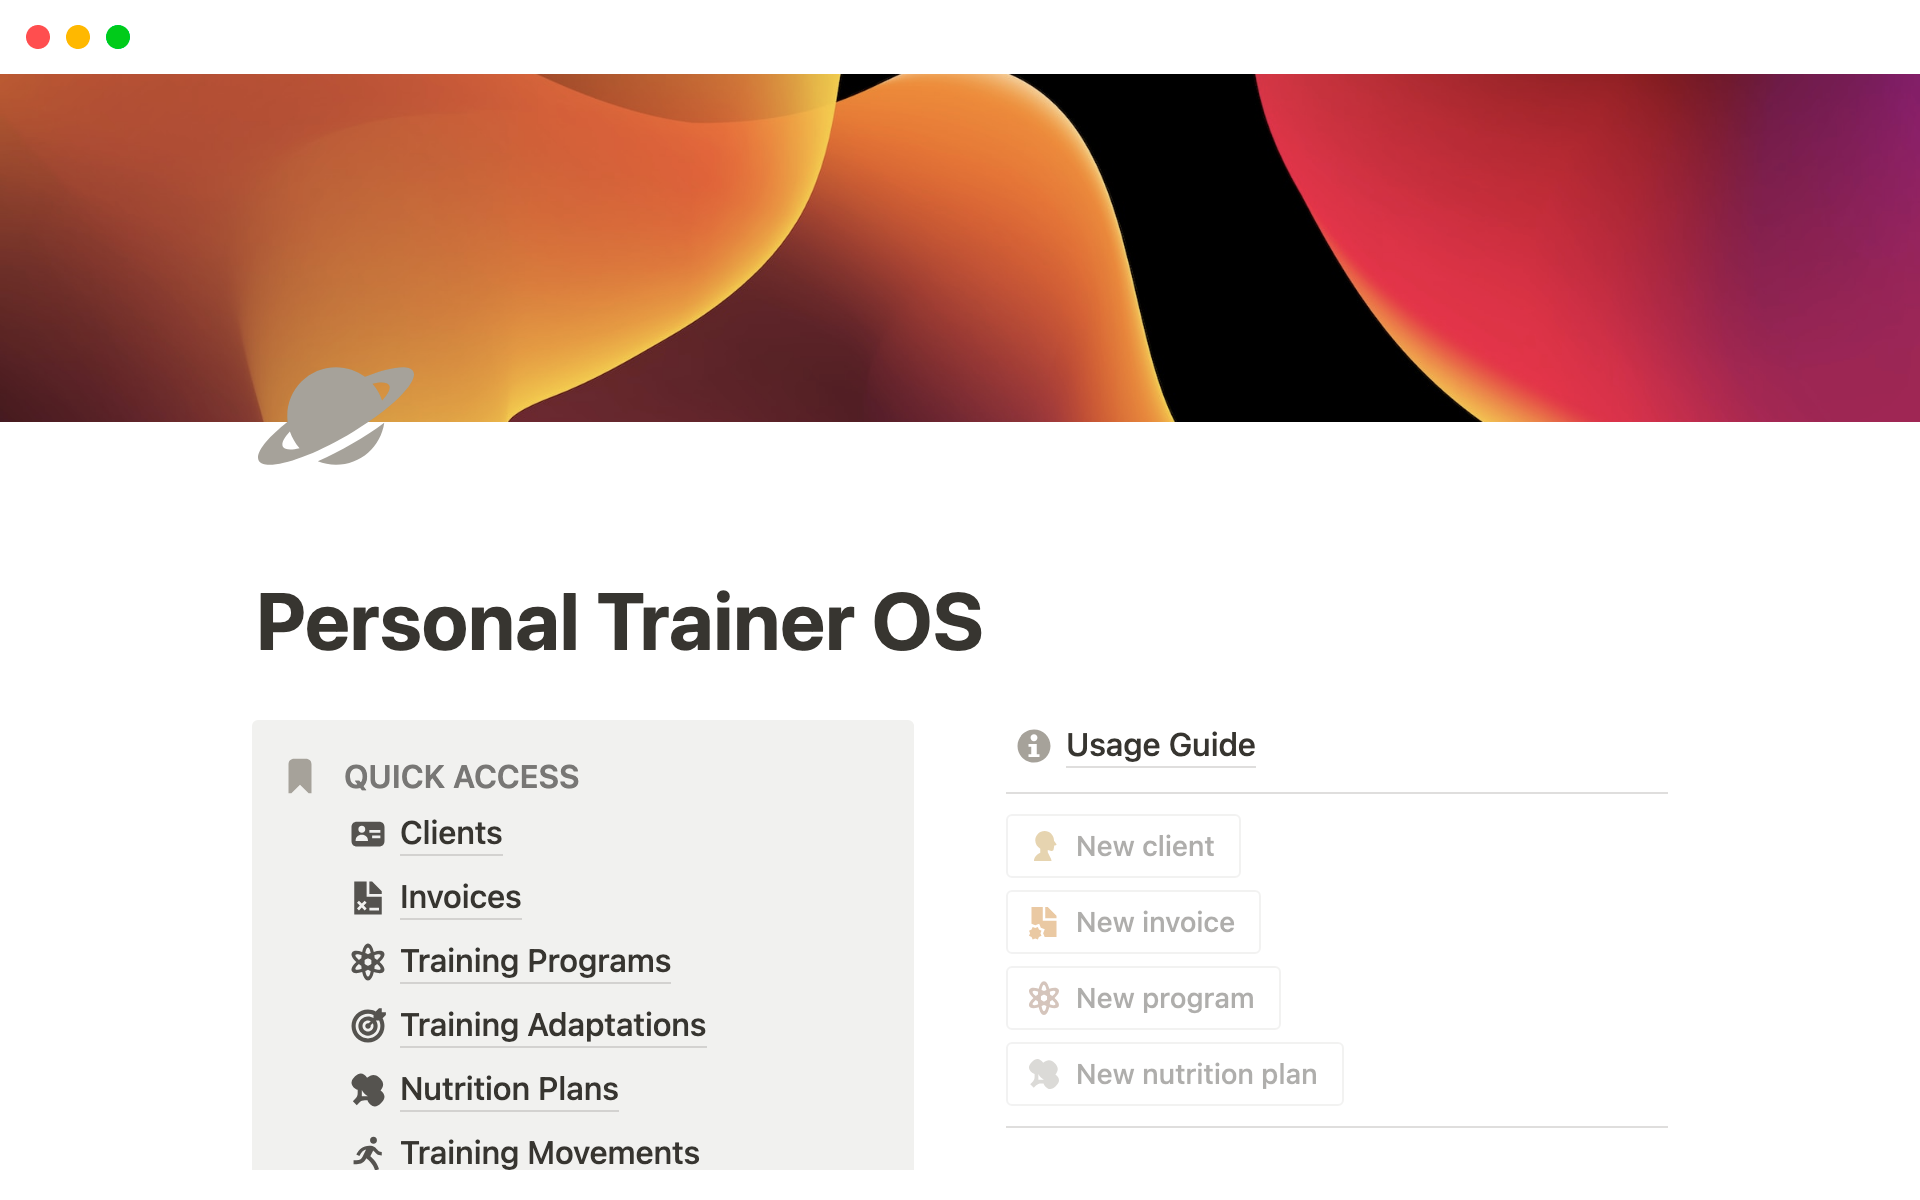 The Personal Trainer OS enables personal trainers to elegantly create, manage, and share programs and nutrition plans with clients